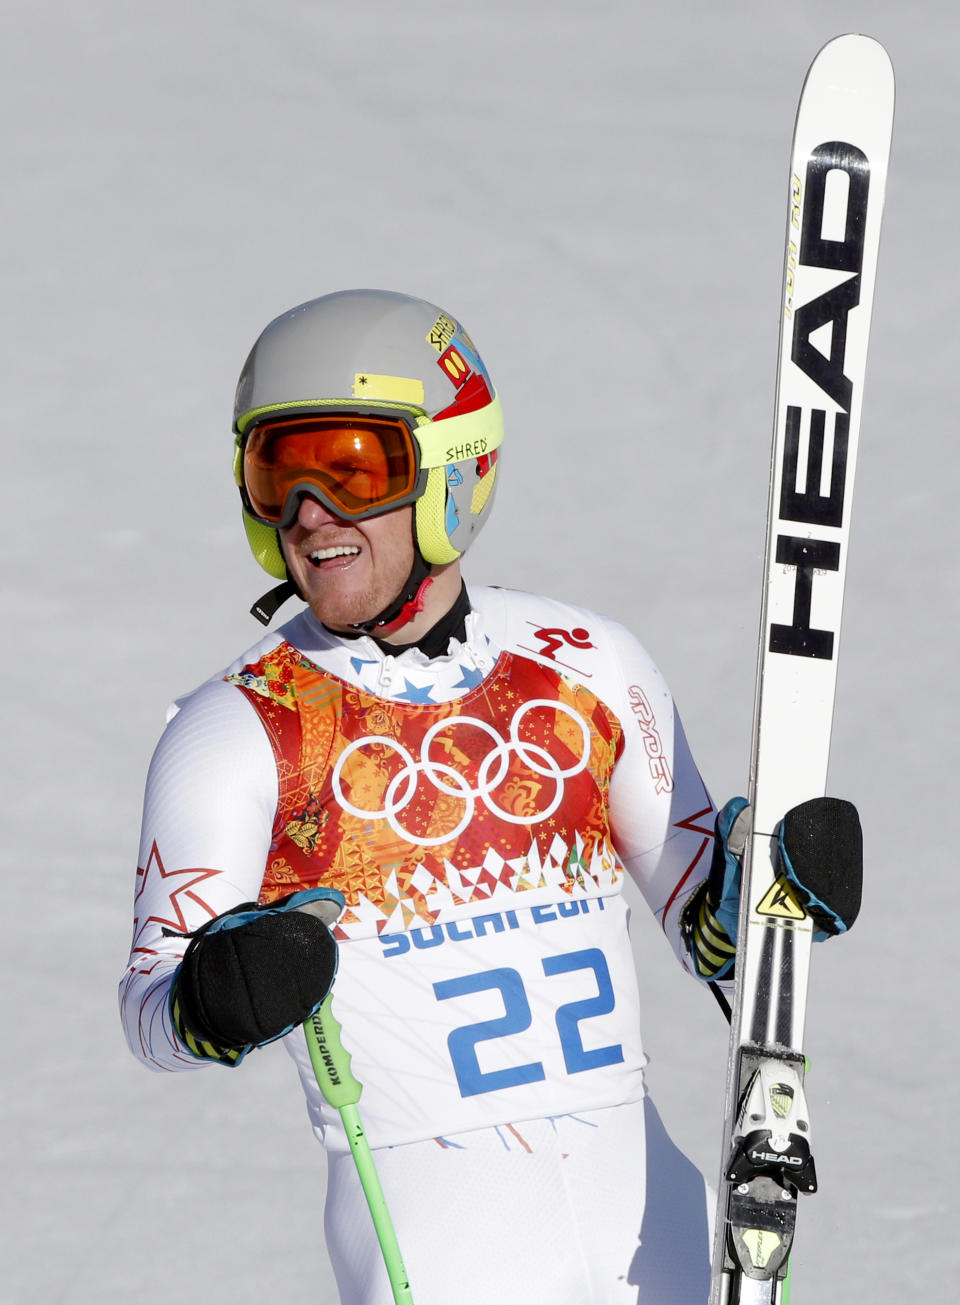 United States' Ted Ligety pauses after finishing the downhill portion of the men's supercombined at the Sochi 2014 Winter Olympics, Friday, Feb. 14, 2014, in Krasnaya Polyana, Russia. (AP Photo/Christophe Ena)